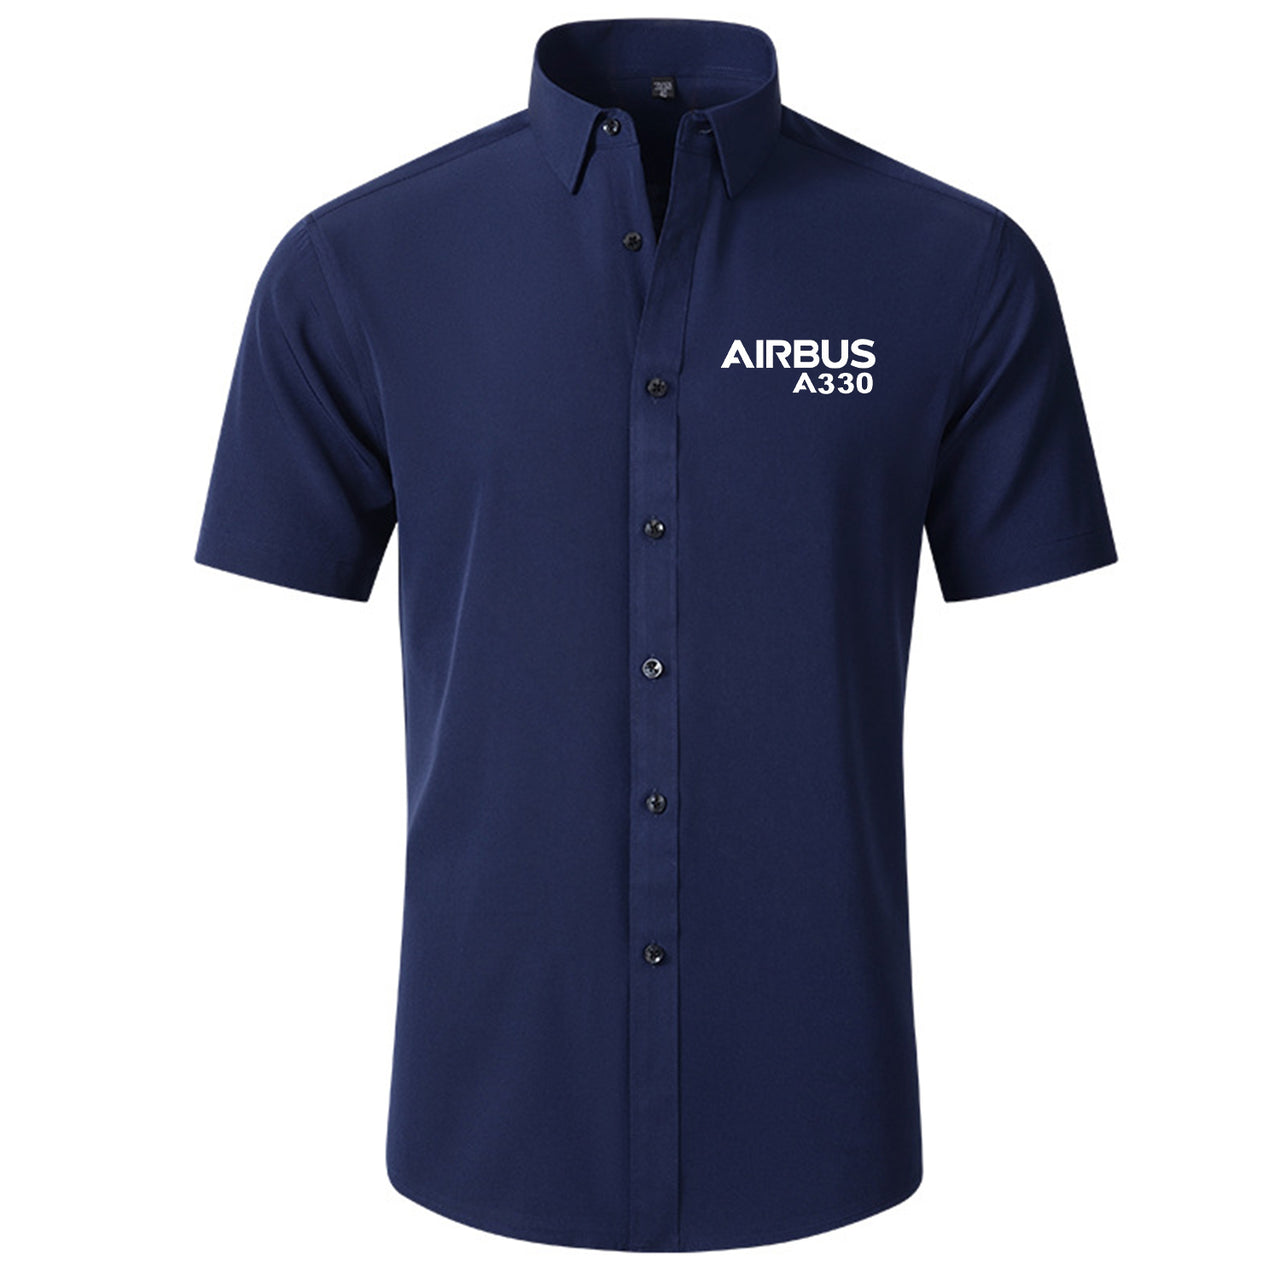 Airbus A330 & Text Designed Short Sleeve Shirts